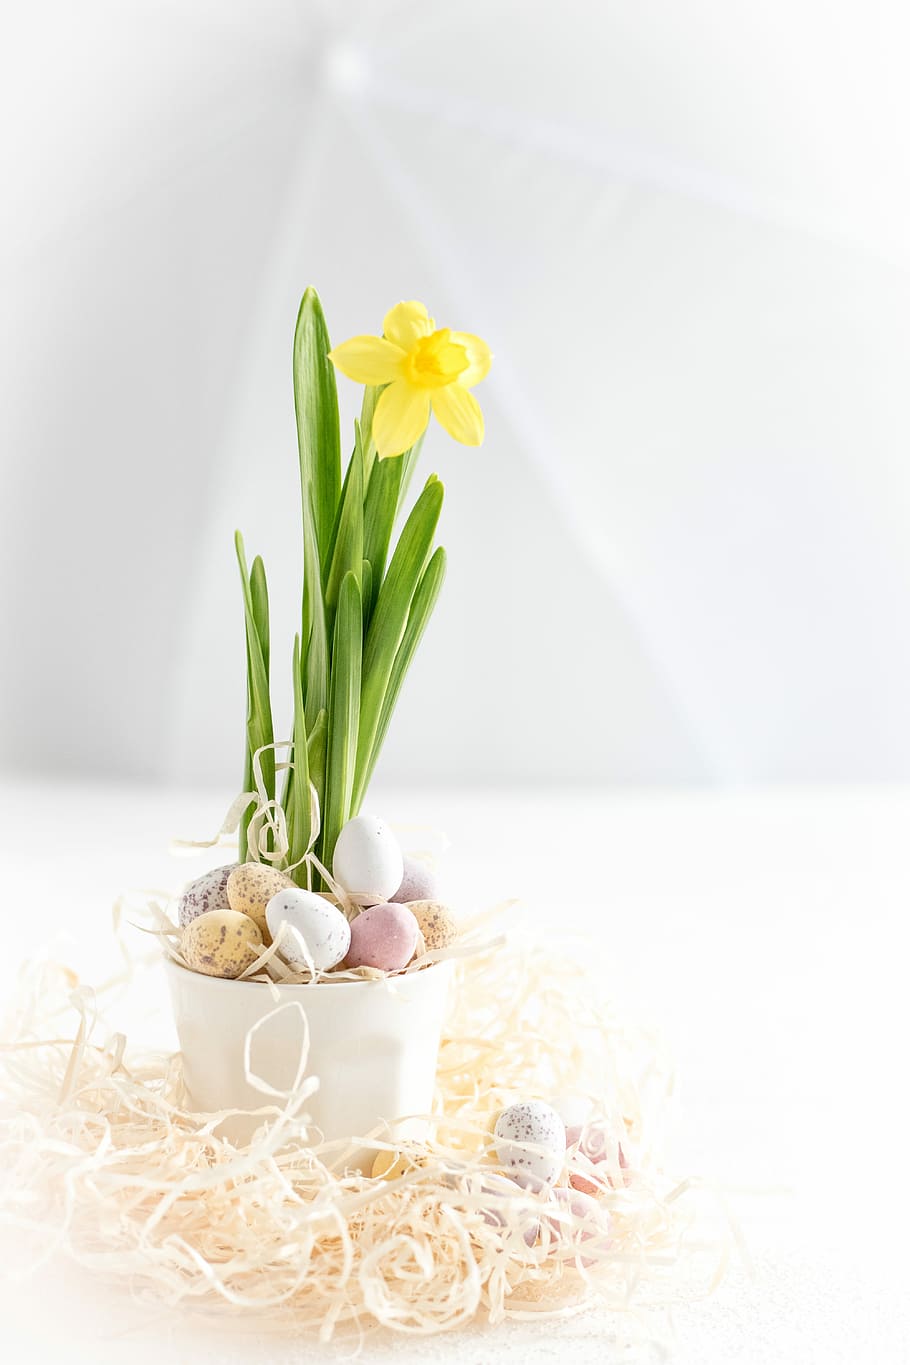 yellow flower, yellwo daffodil in white vase with Easter eggs closeup photography, HD wallpaper